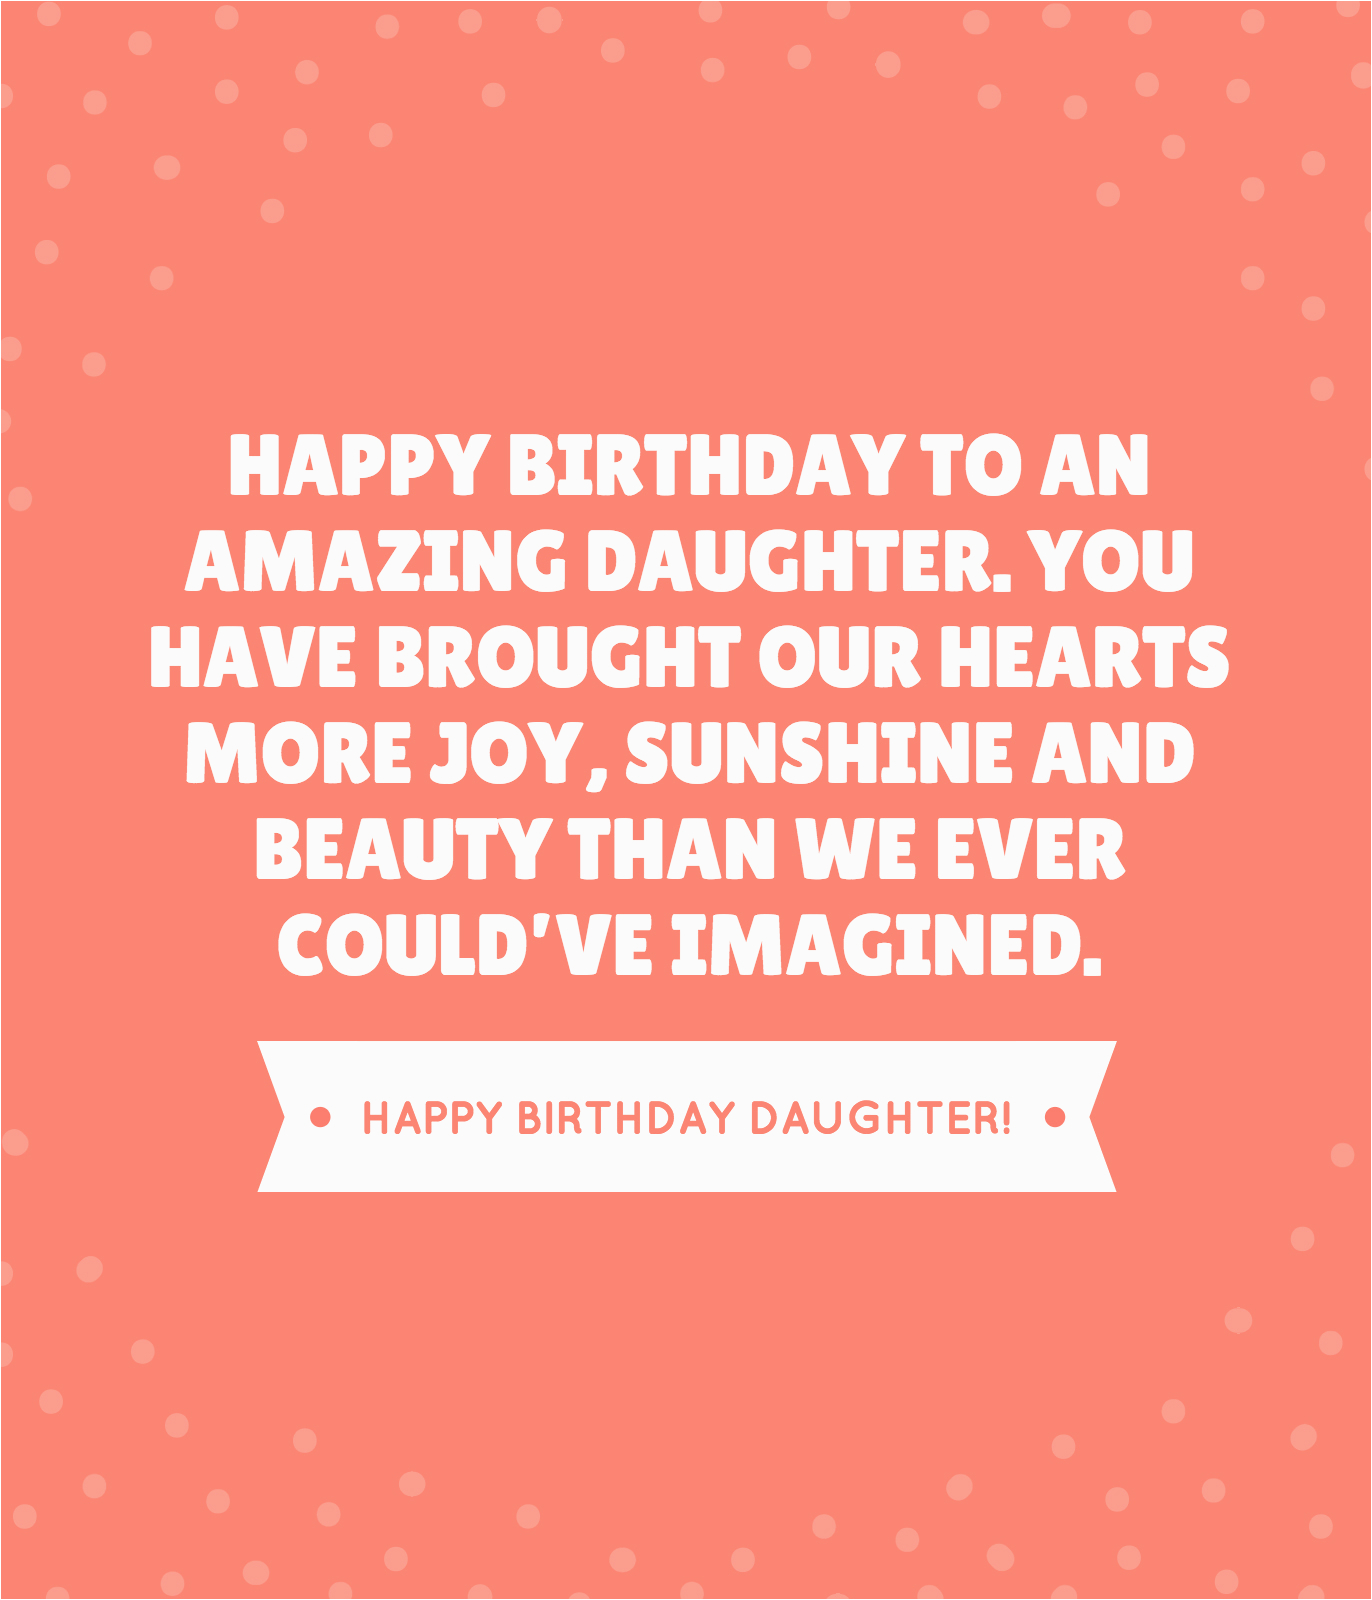 Happy Birthday Quotes for Your Daughter 35 Beautiful Ways to Say Happy Birthday Daughter Unique